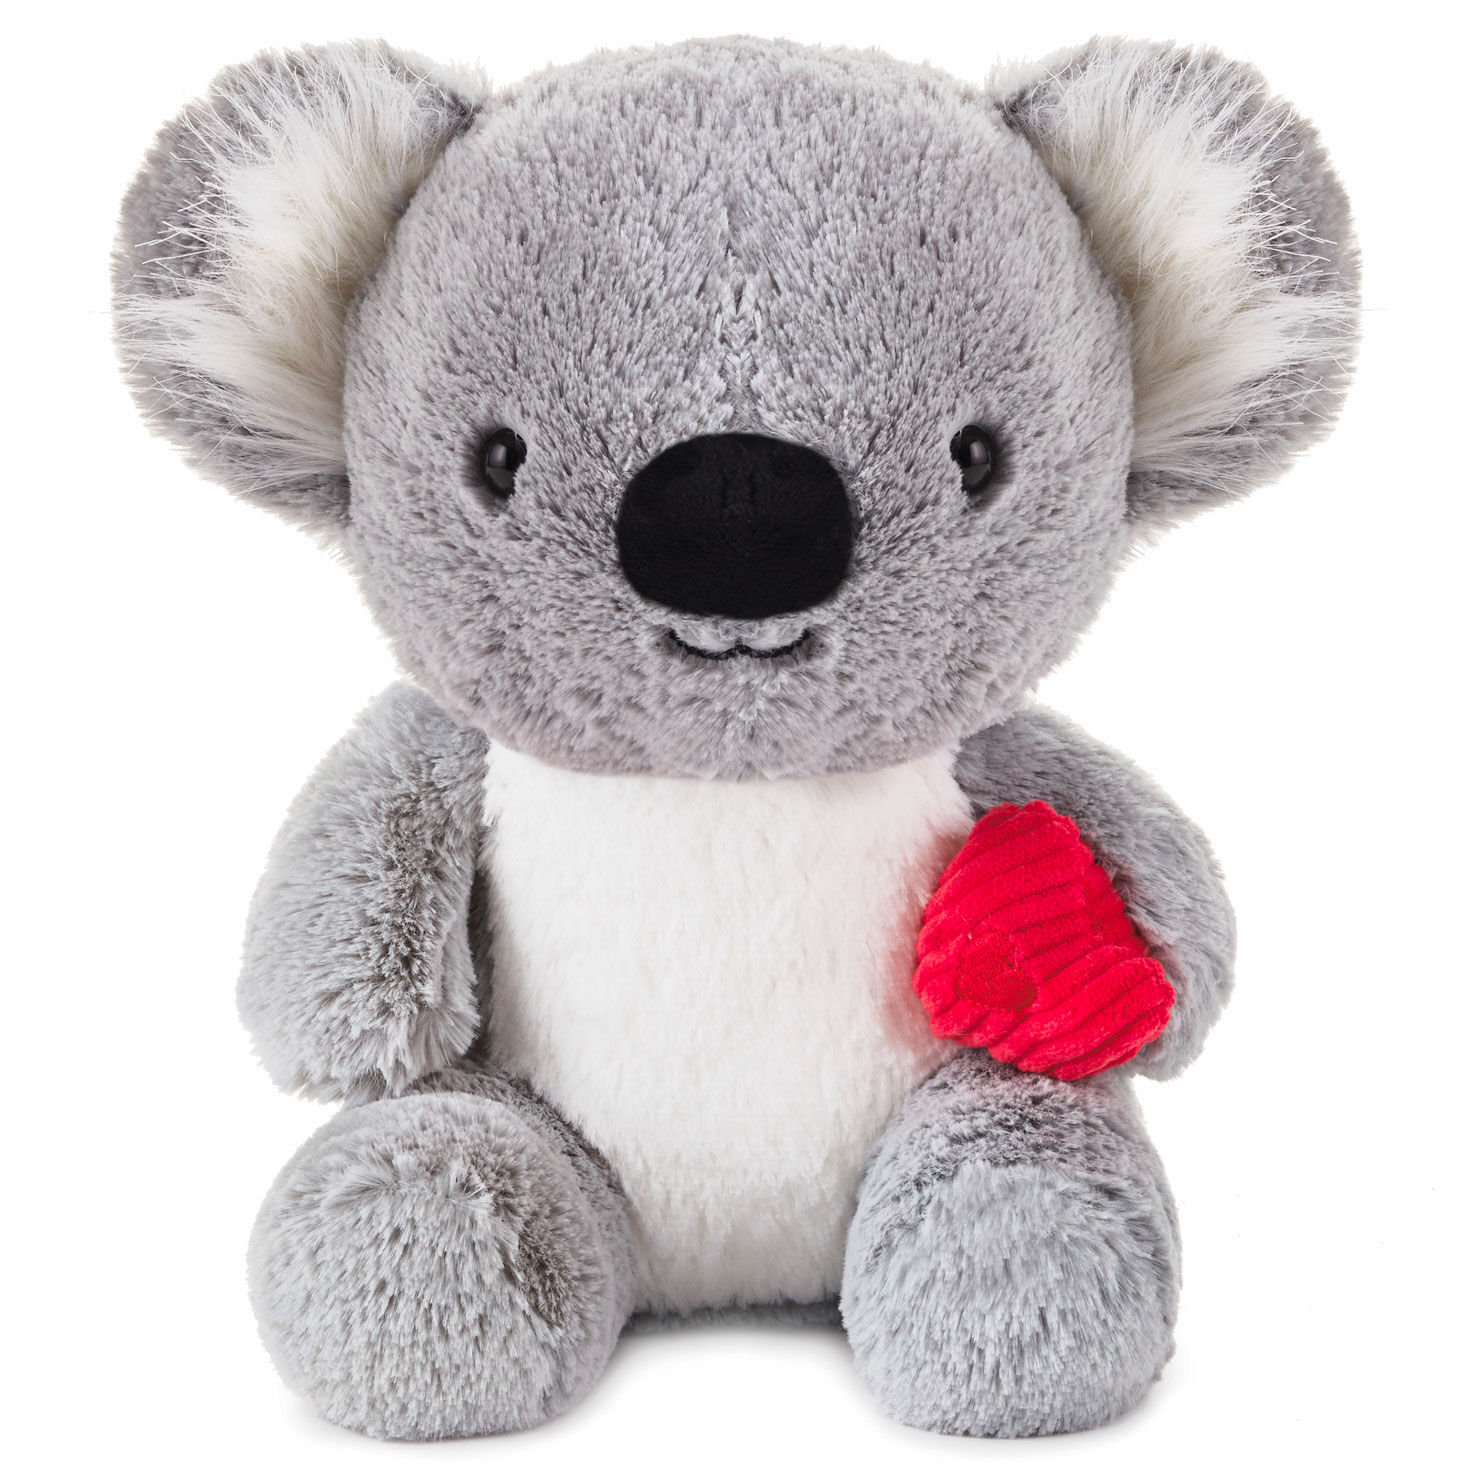 Mother's Day Re recordable Stuffed Animal Gift 